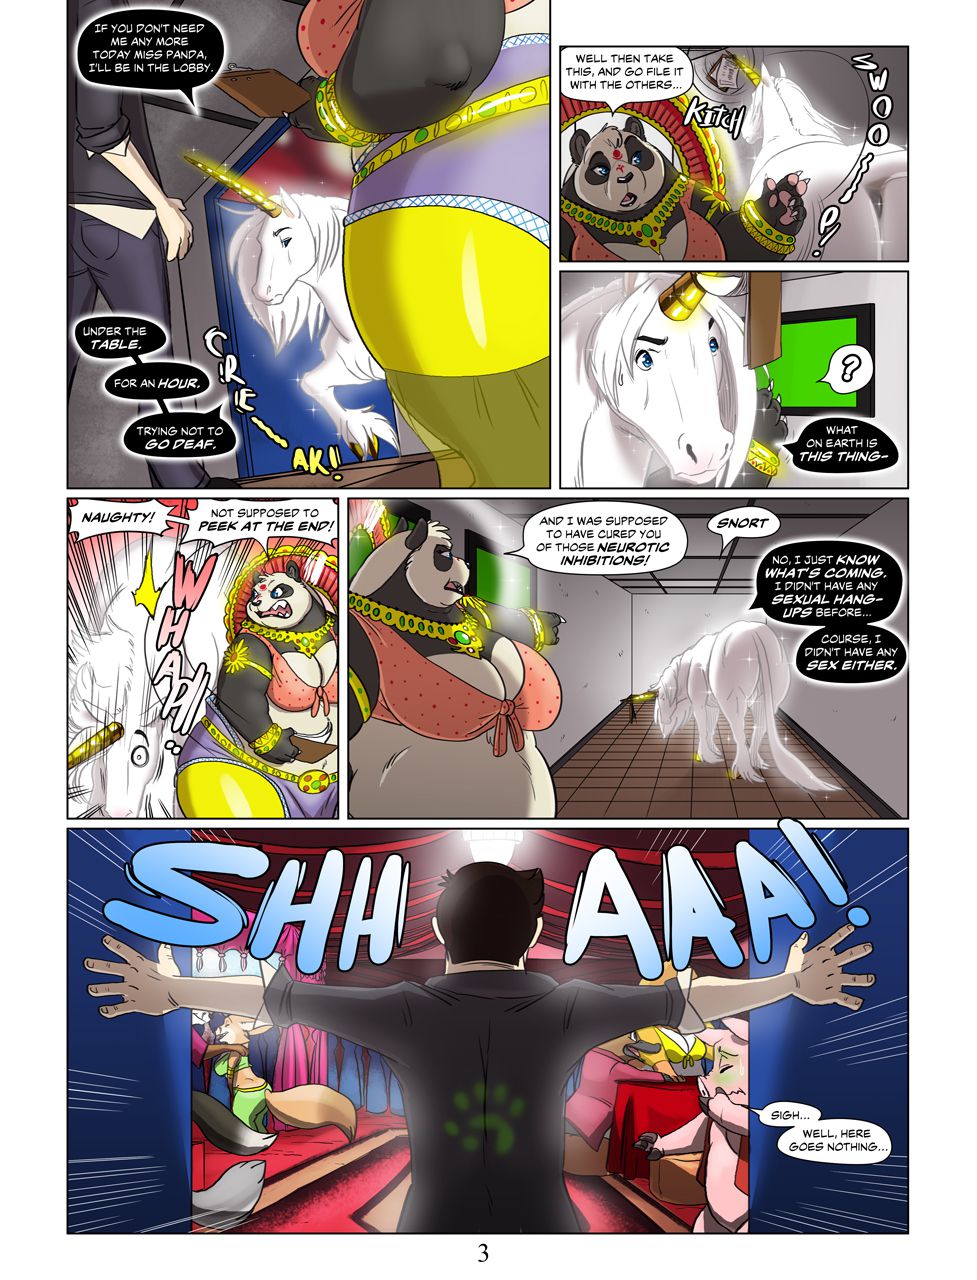 [Gillpanda] Red Chair appointment 6[In Progress] 3